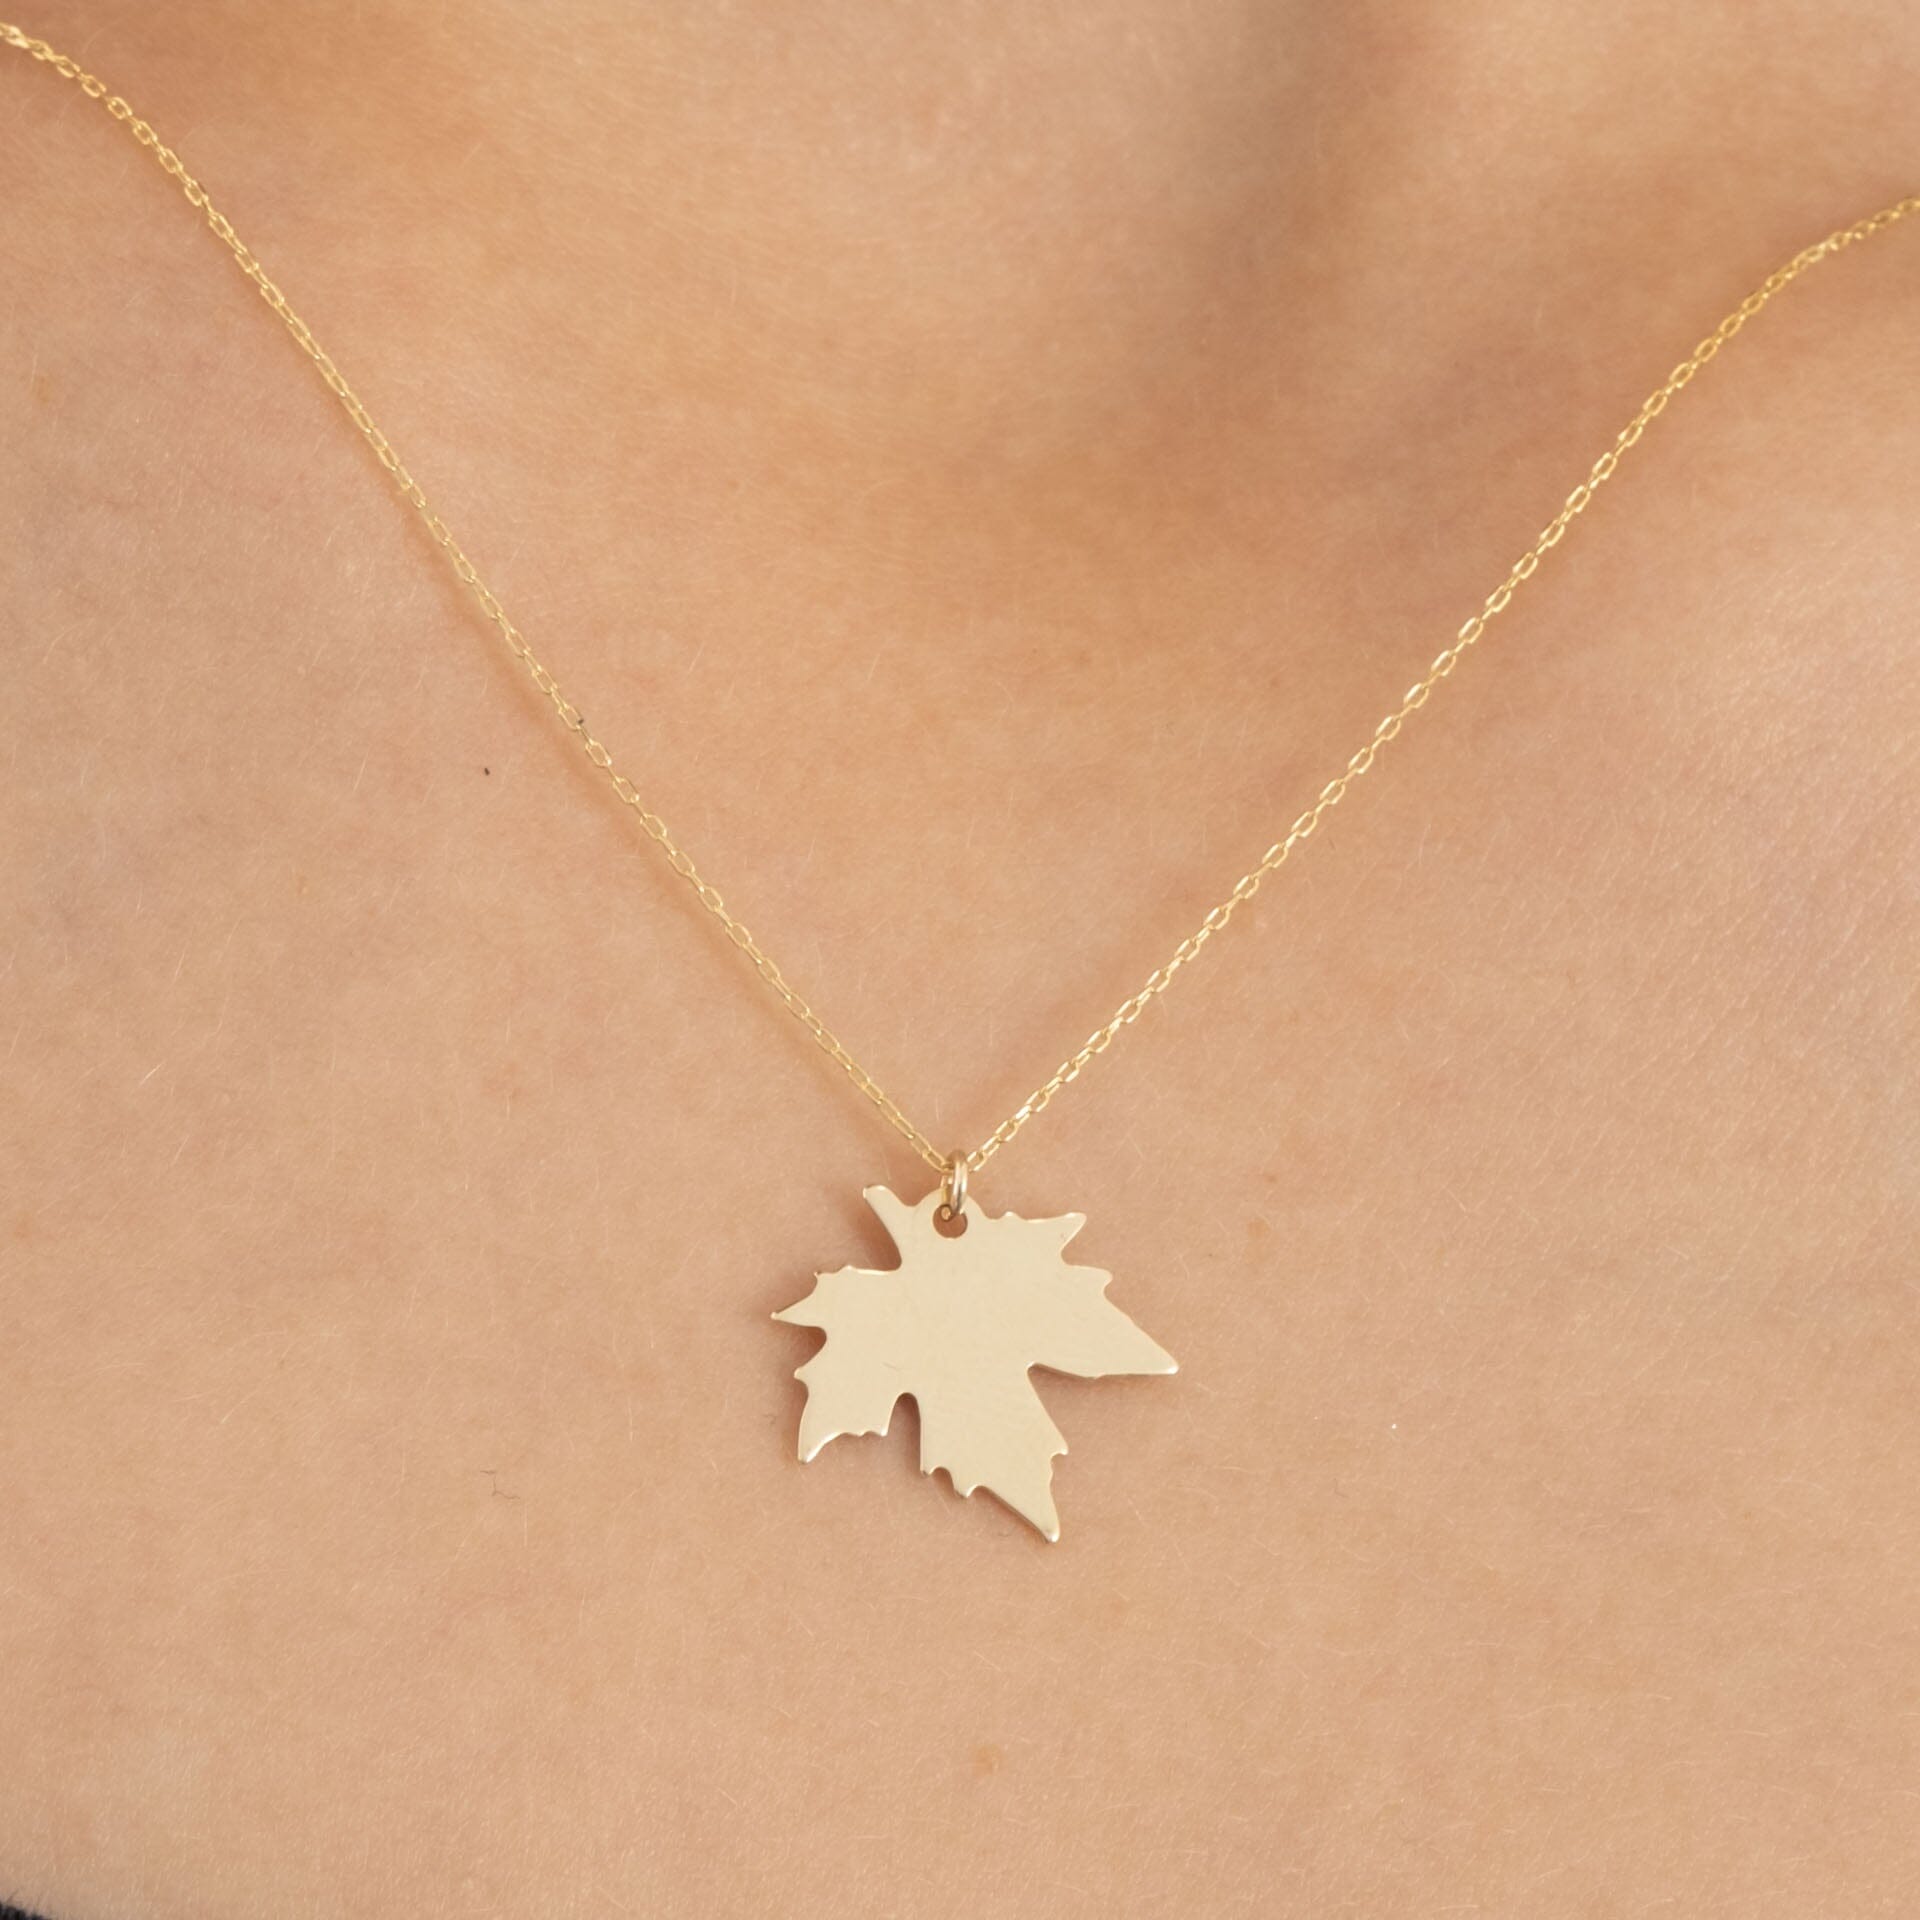 Maple Leaf Necklace | Grow Good Things